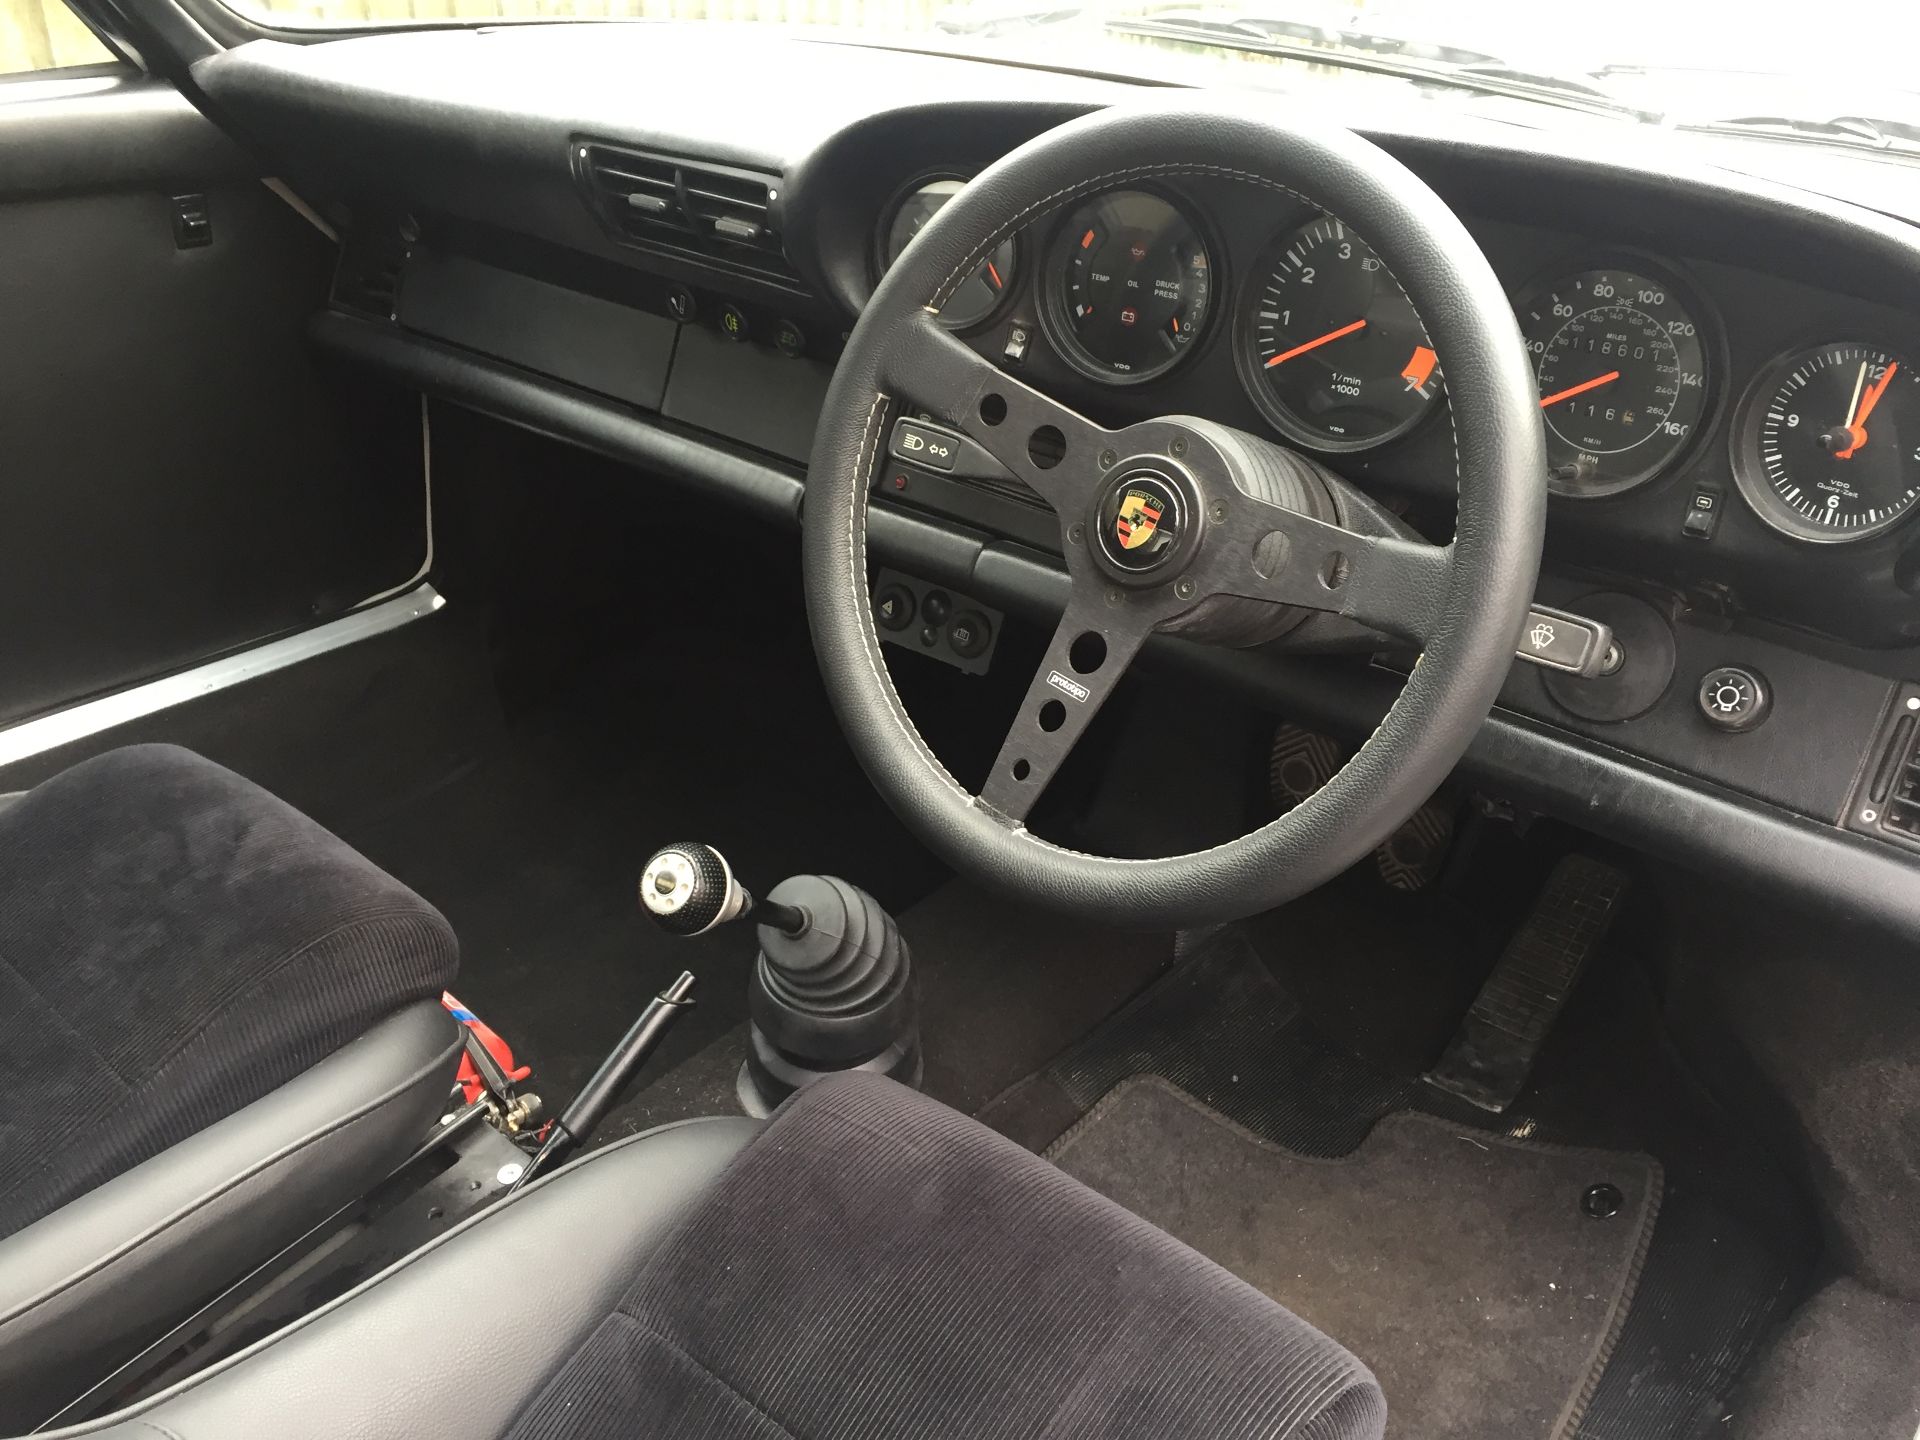 Porsche 911 Carrera 2.7 Rs Recreation - Pro 9 Build Based On A 1986 Porsche 911 **Reserve reduced** - Image 17 of 21